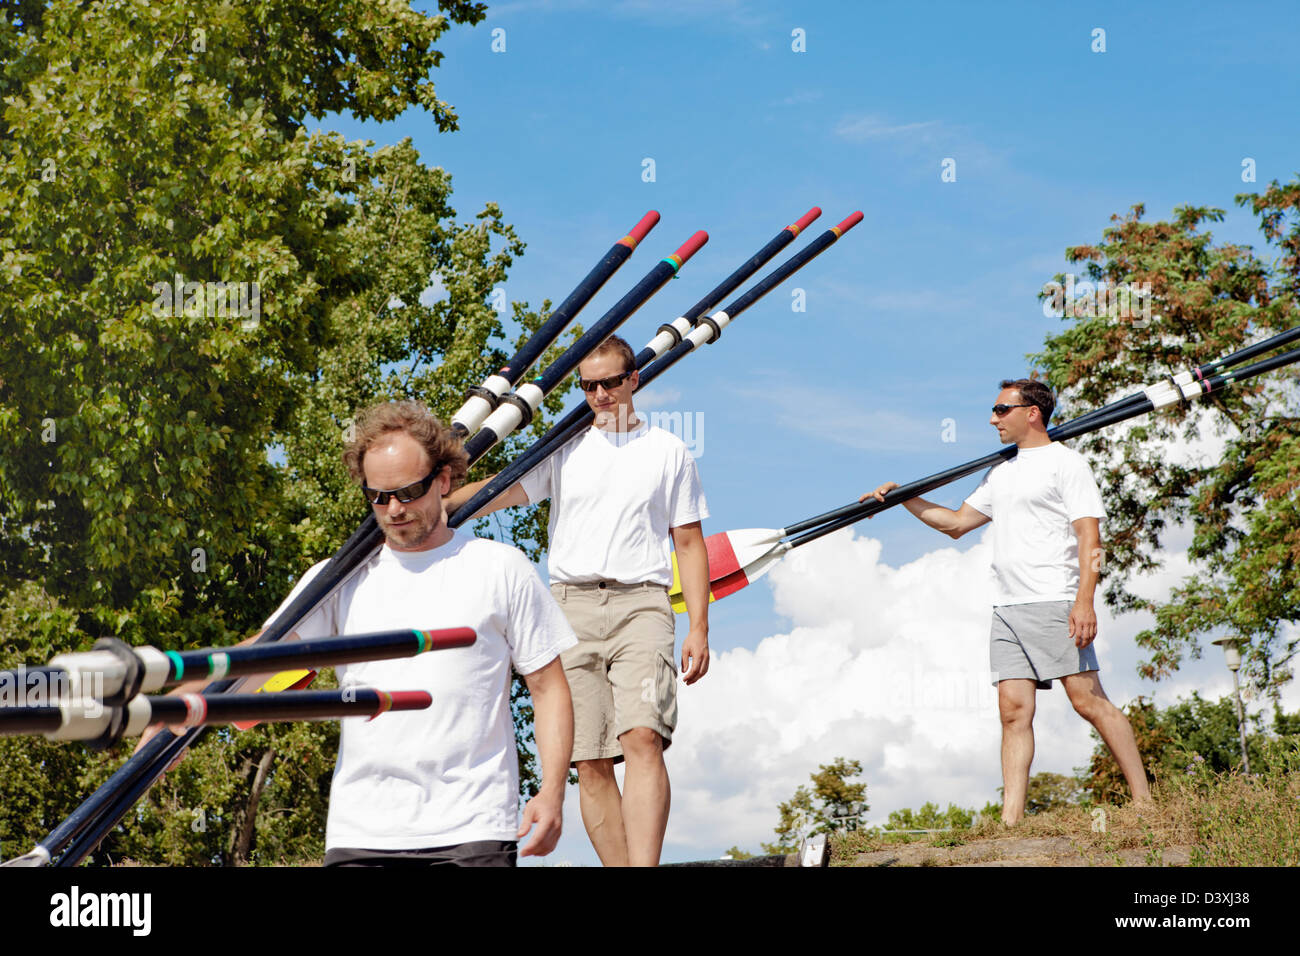 Teamwork Concept of Men Rowing Team Setting Paddles in Preparation Stock Photo